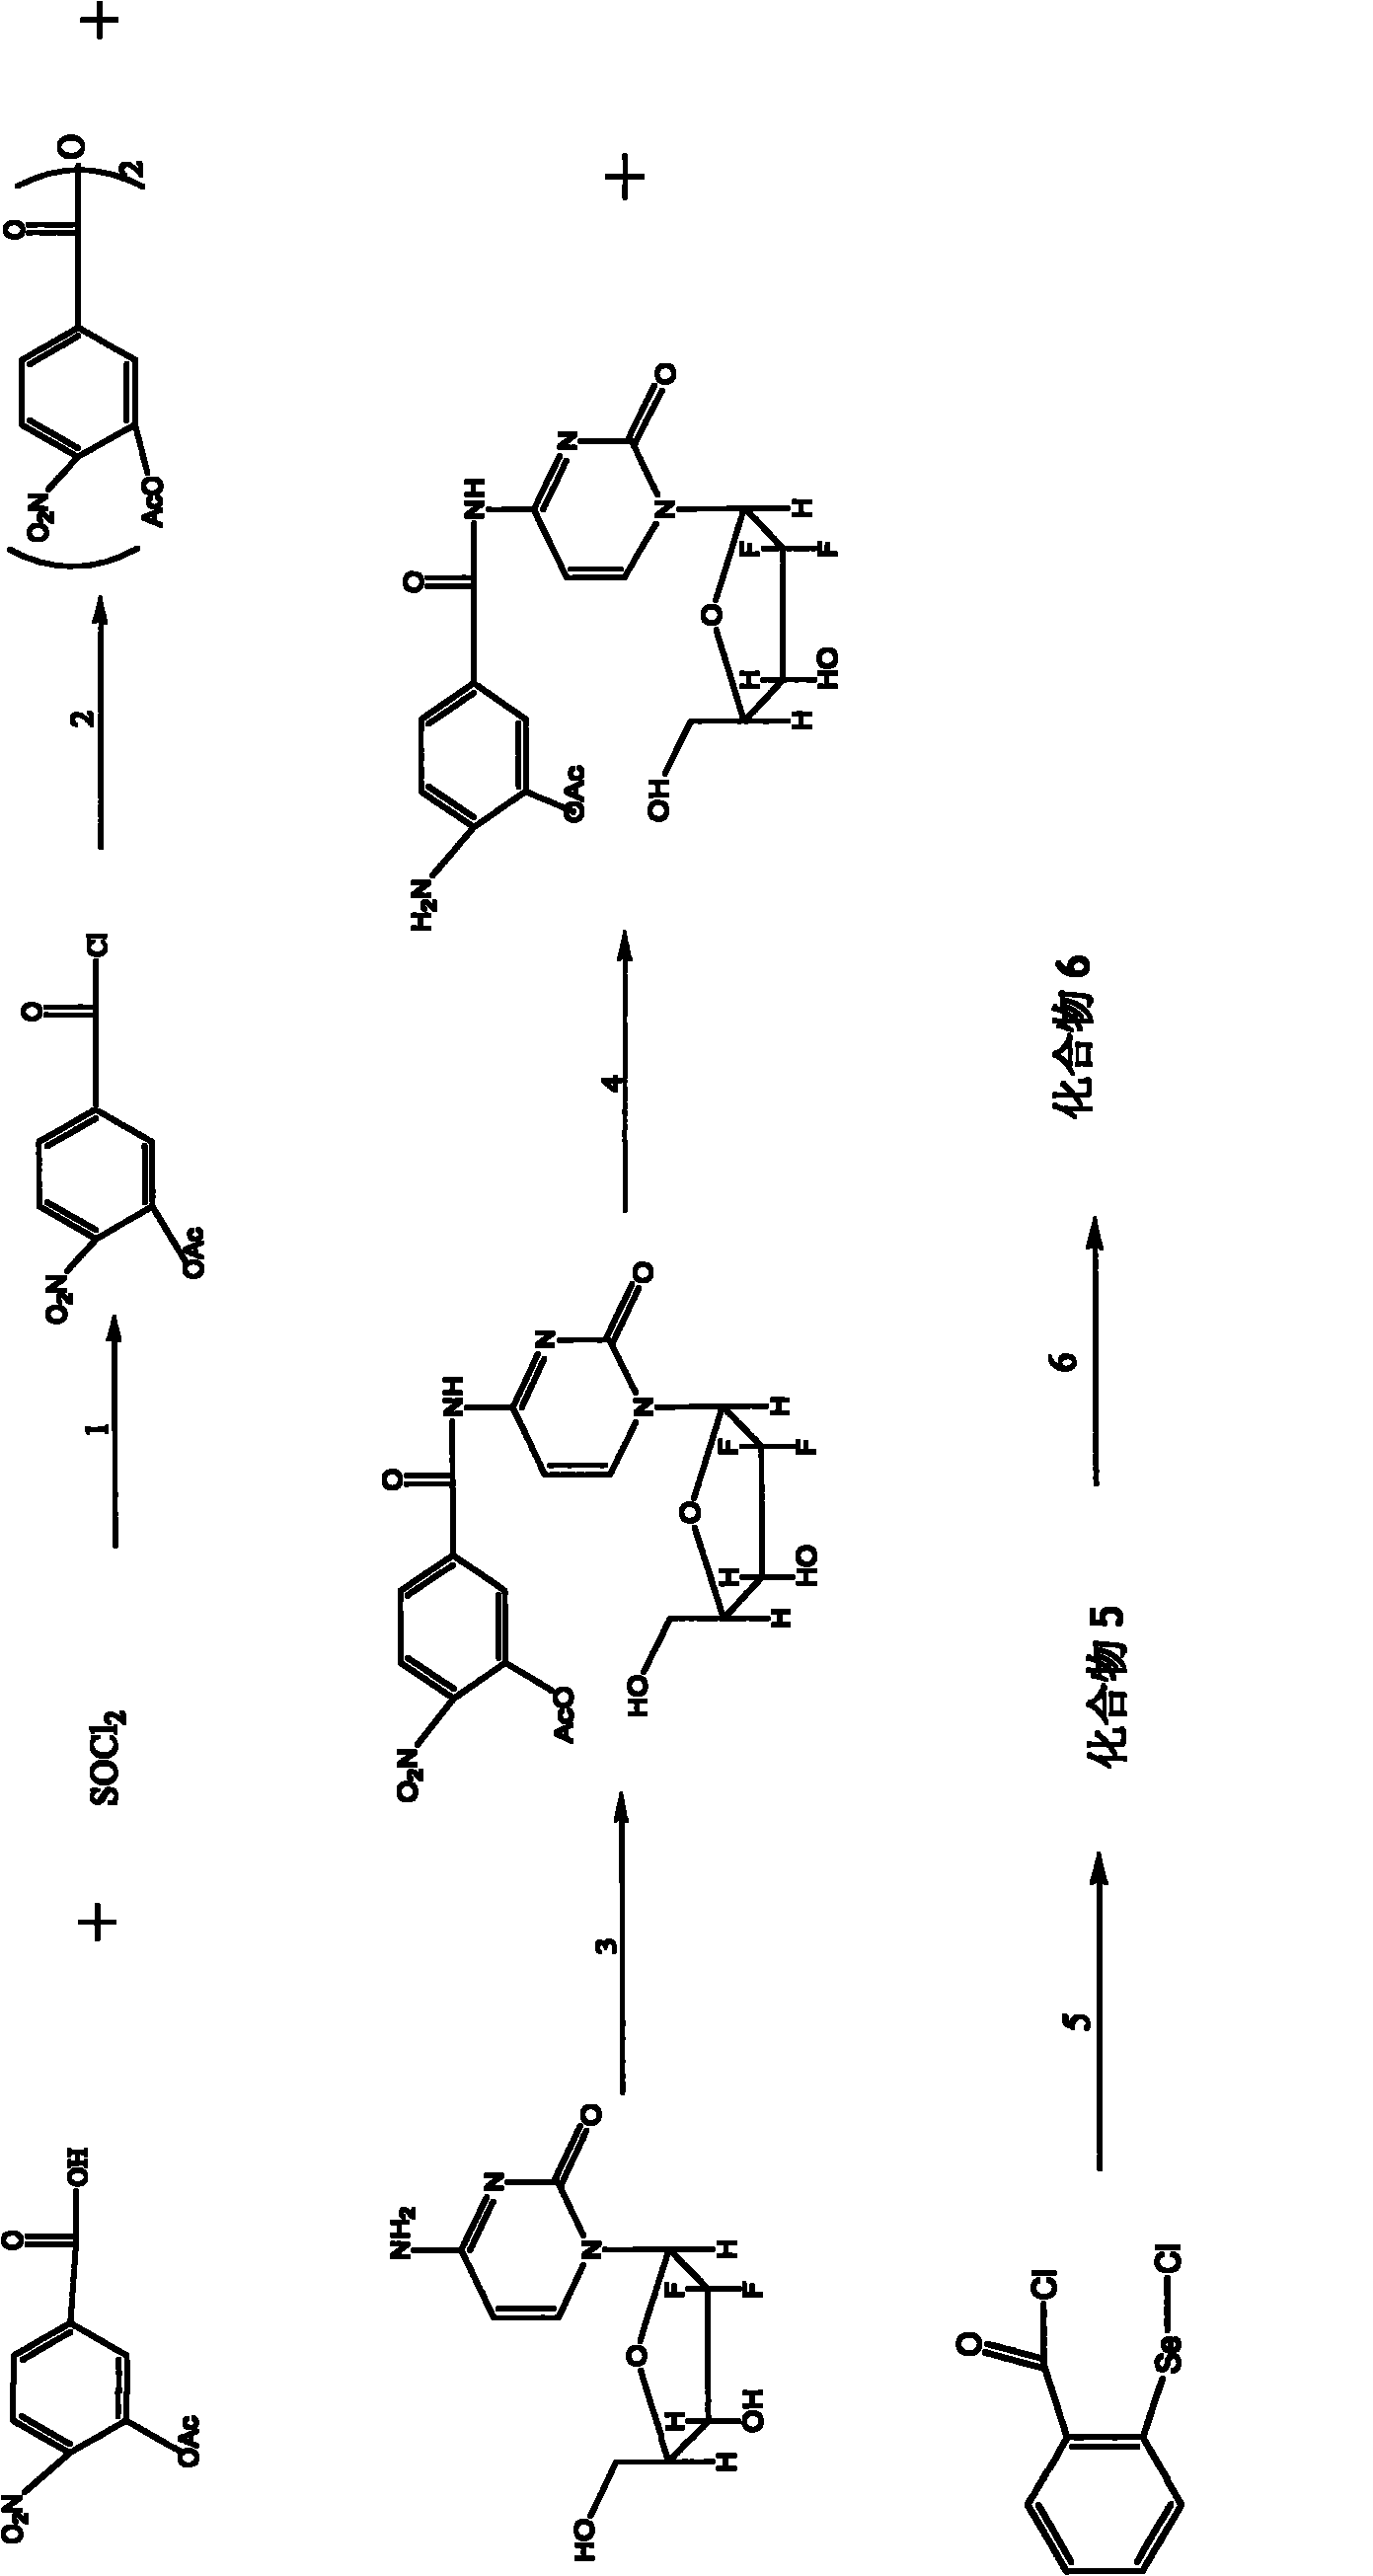 Benzisoselenazolone difluorocytidine compound as well as preparation method and application thereof